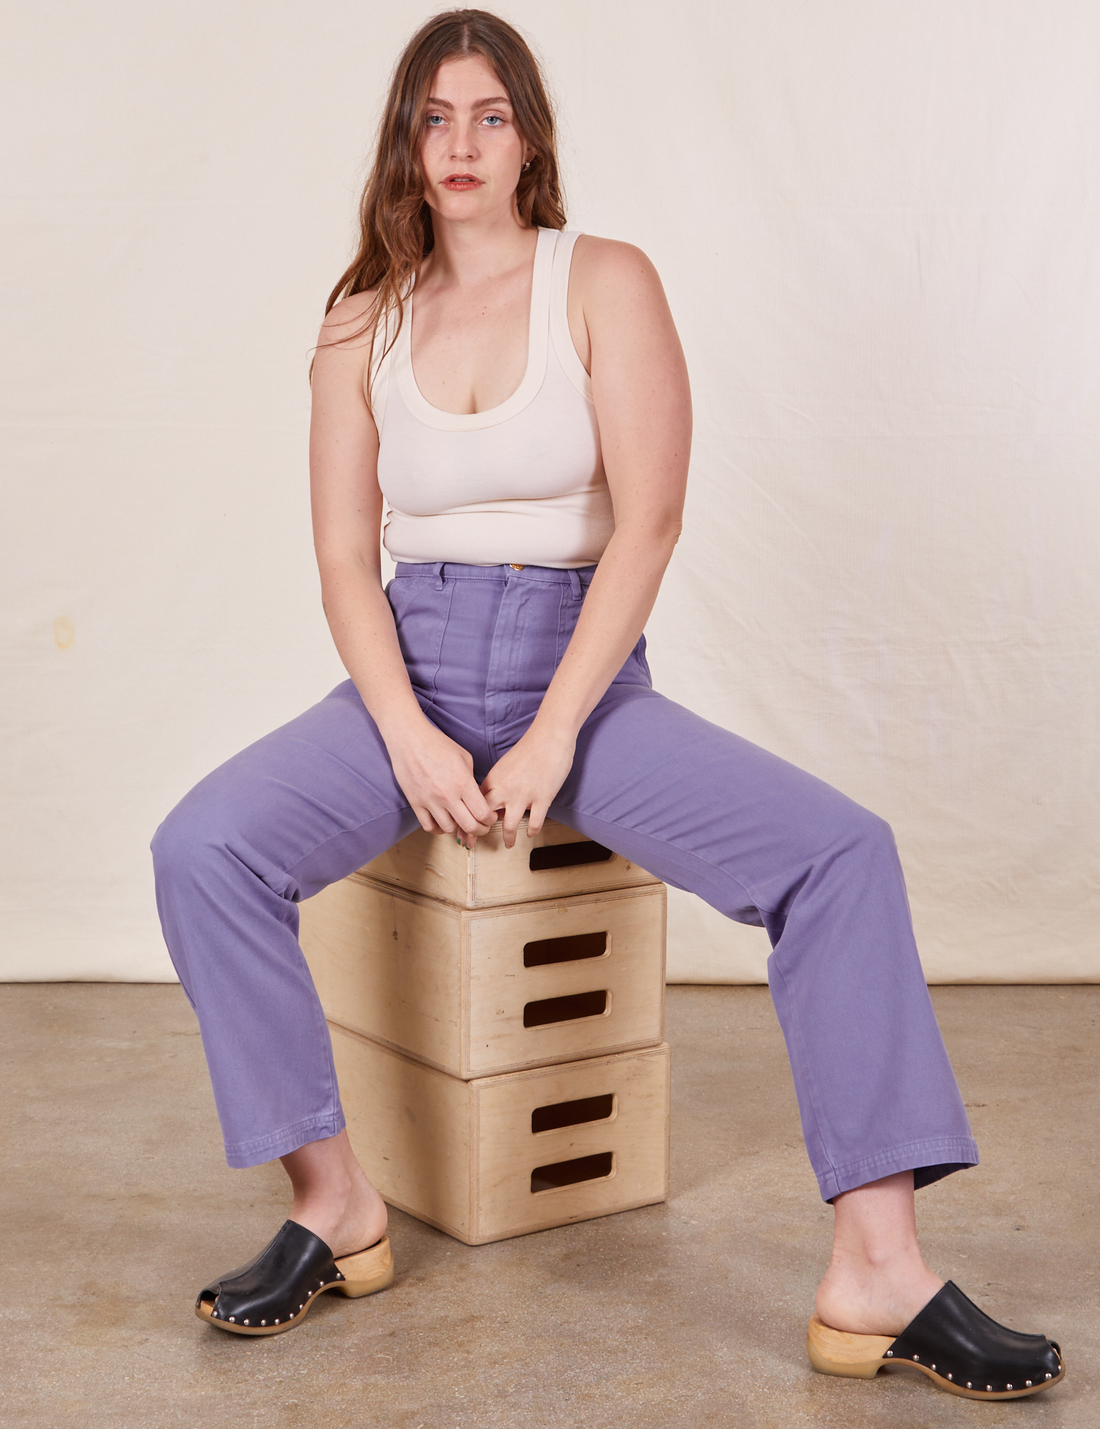 Allison is sitting on a stack of wooden crates wearing Work Pants in Faded Grape and a vintage off-white Tank Top